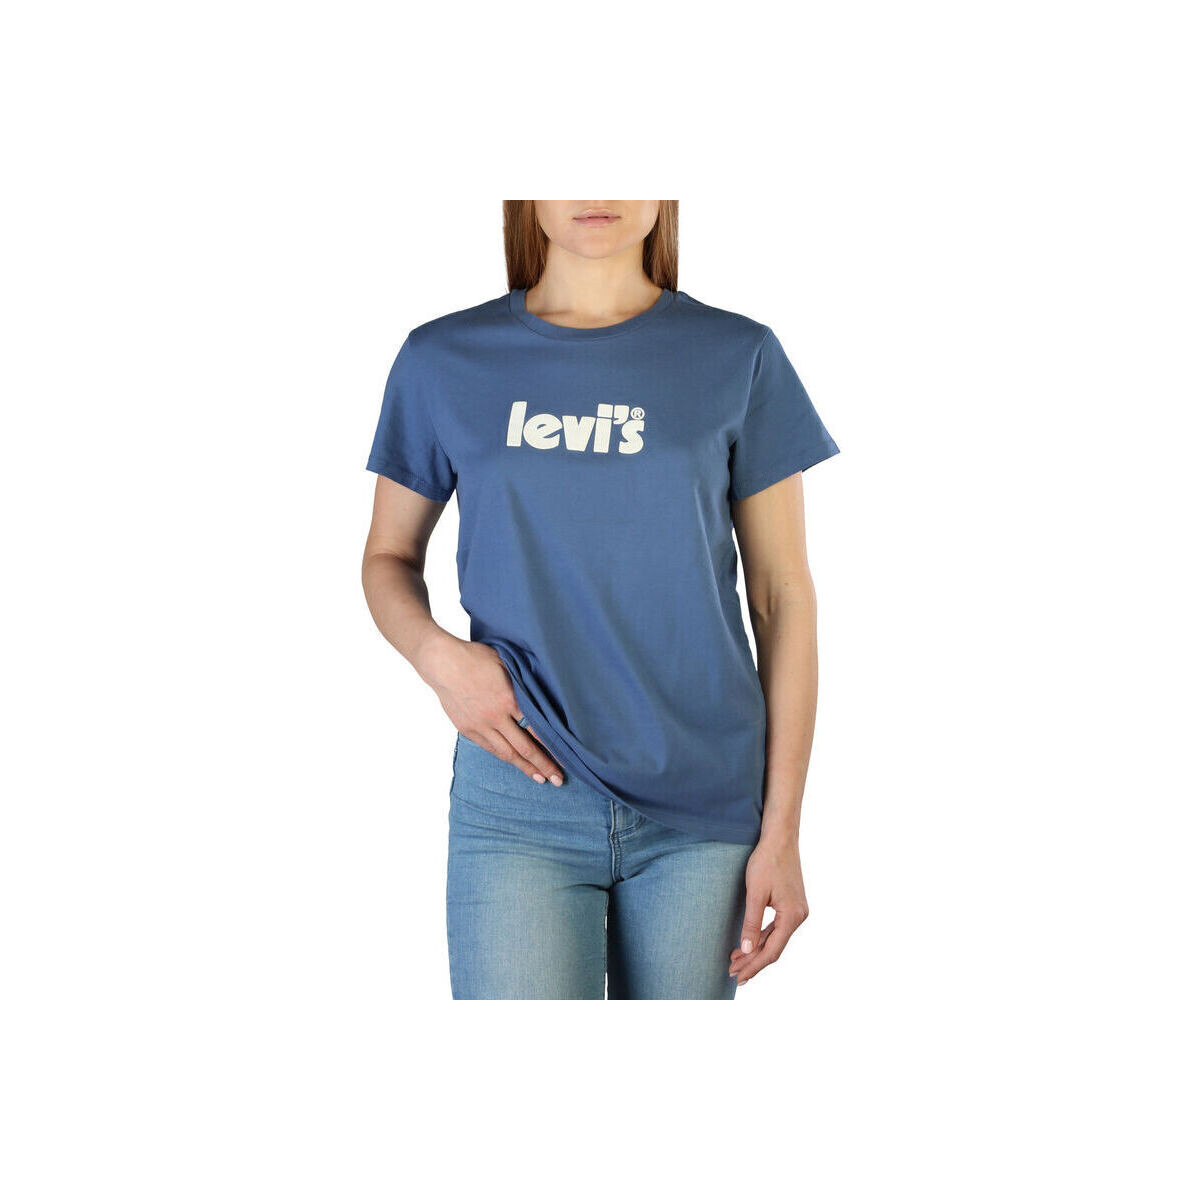 Textil Mulher Tops / Blusas Levi's - 17369_the-perfect Azul